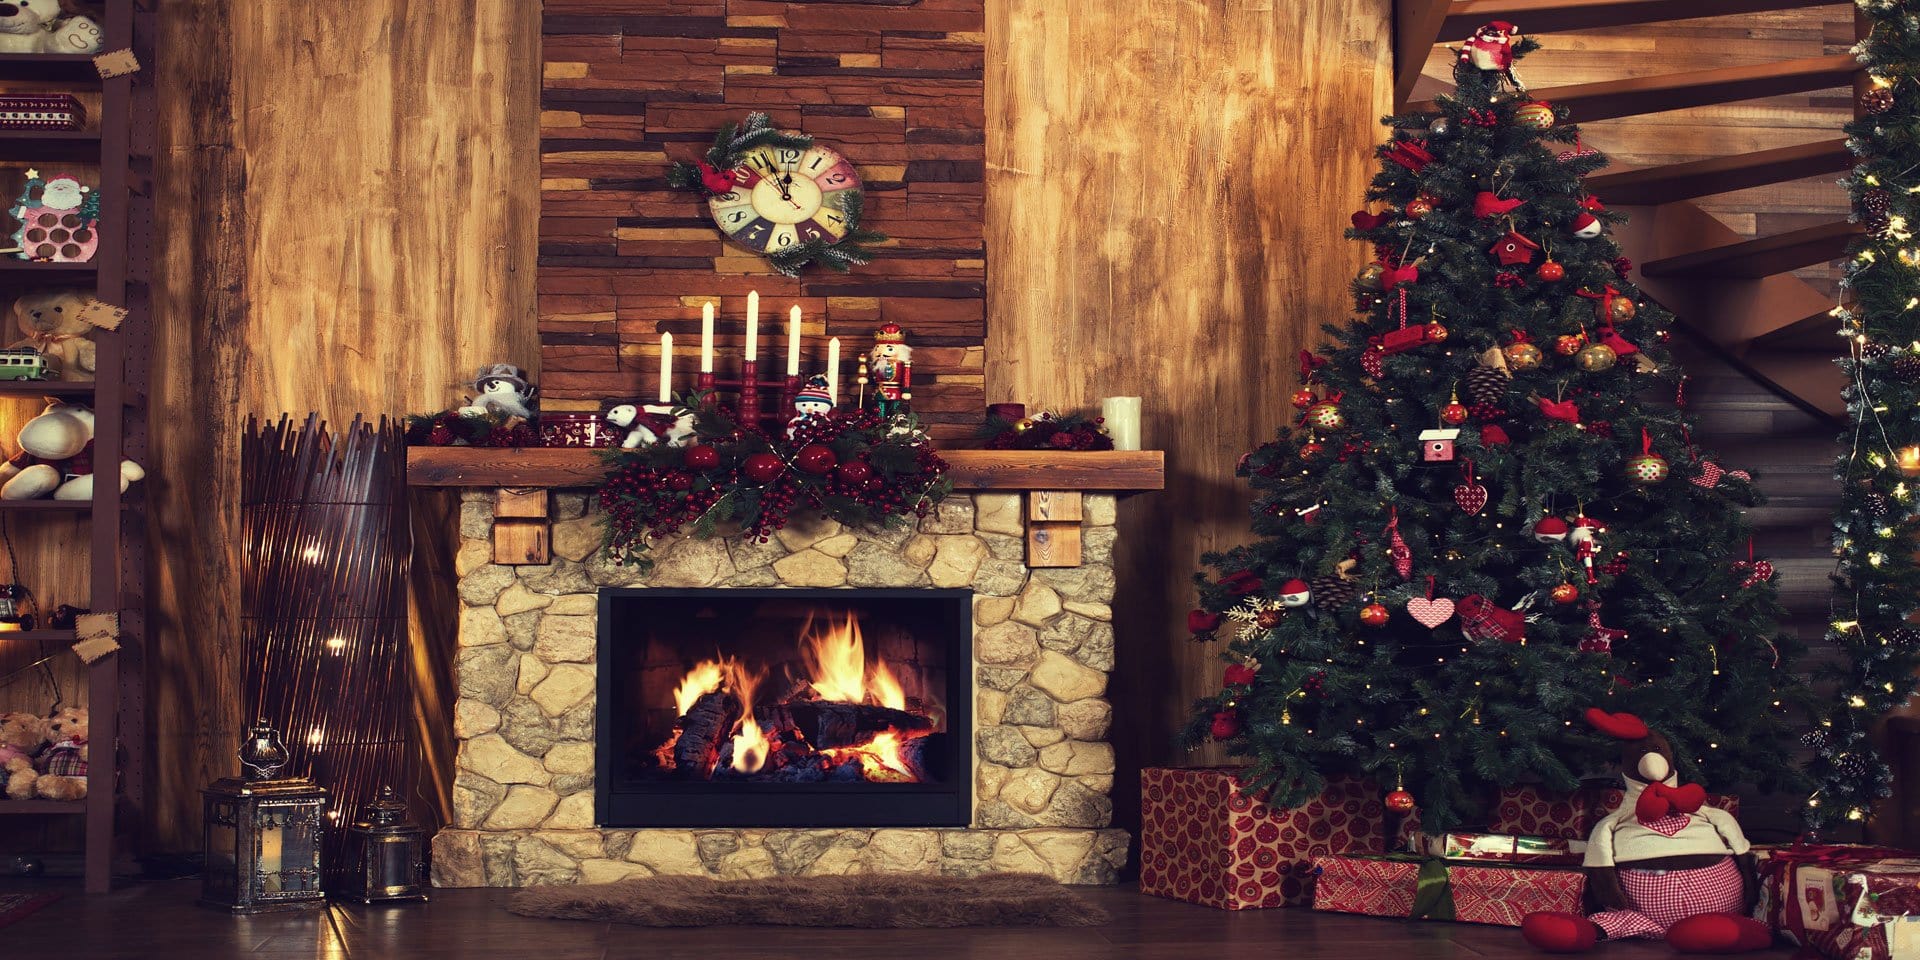 Kate Fireplace With Christmas Tree for Photography - Kate Backdrop